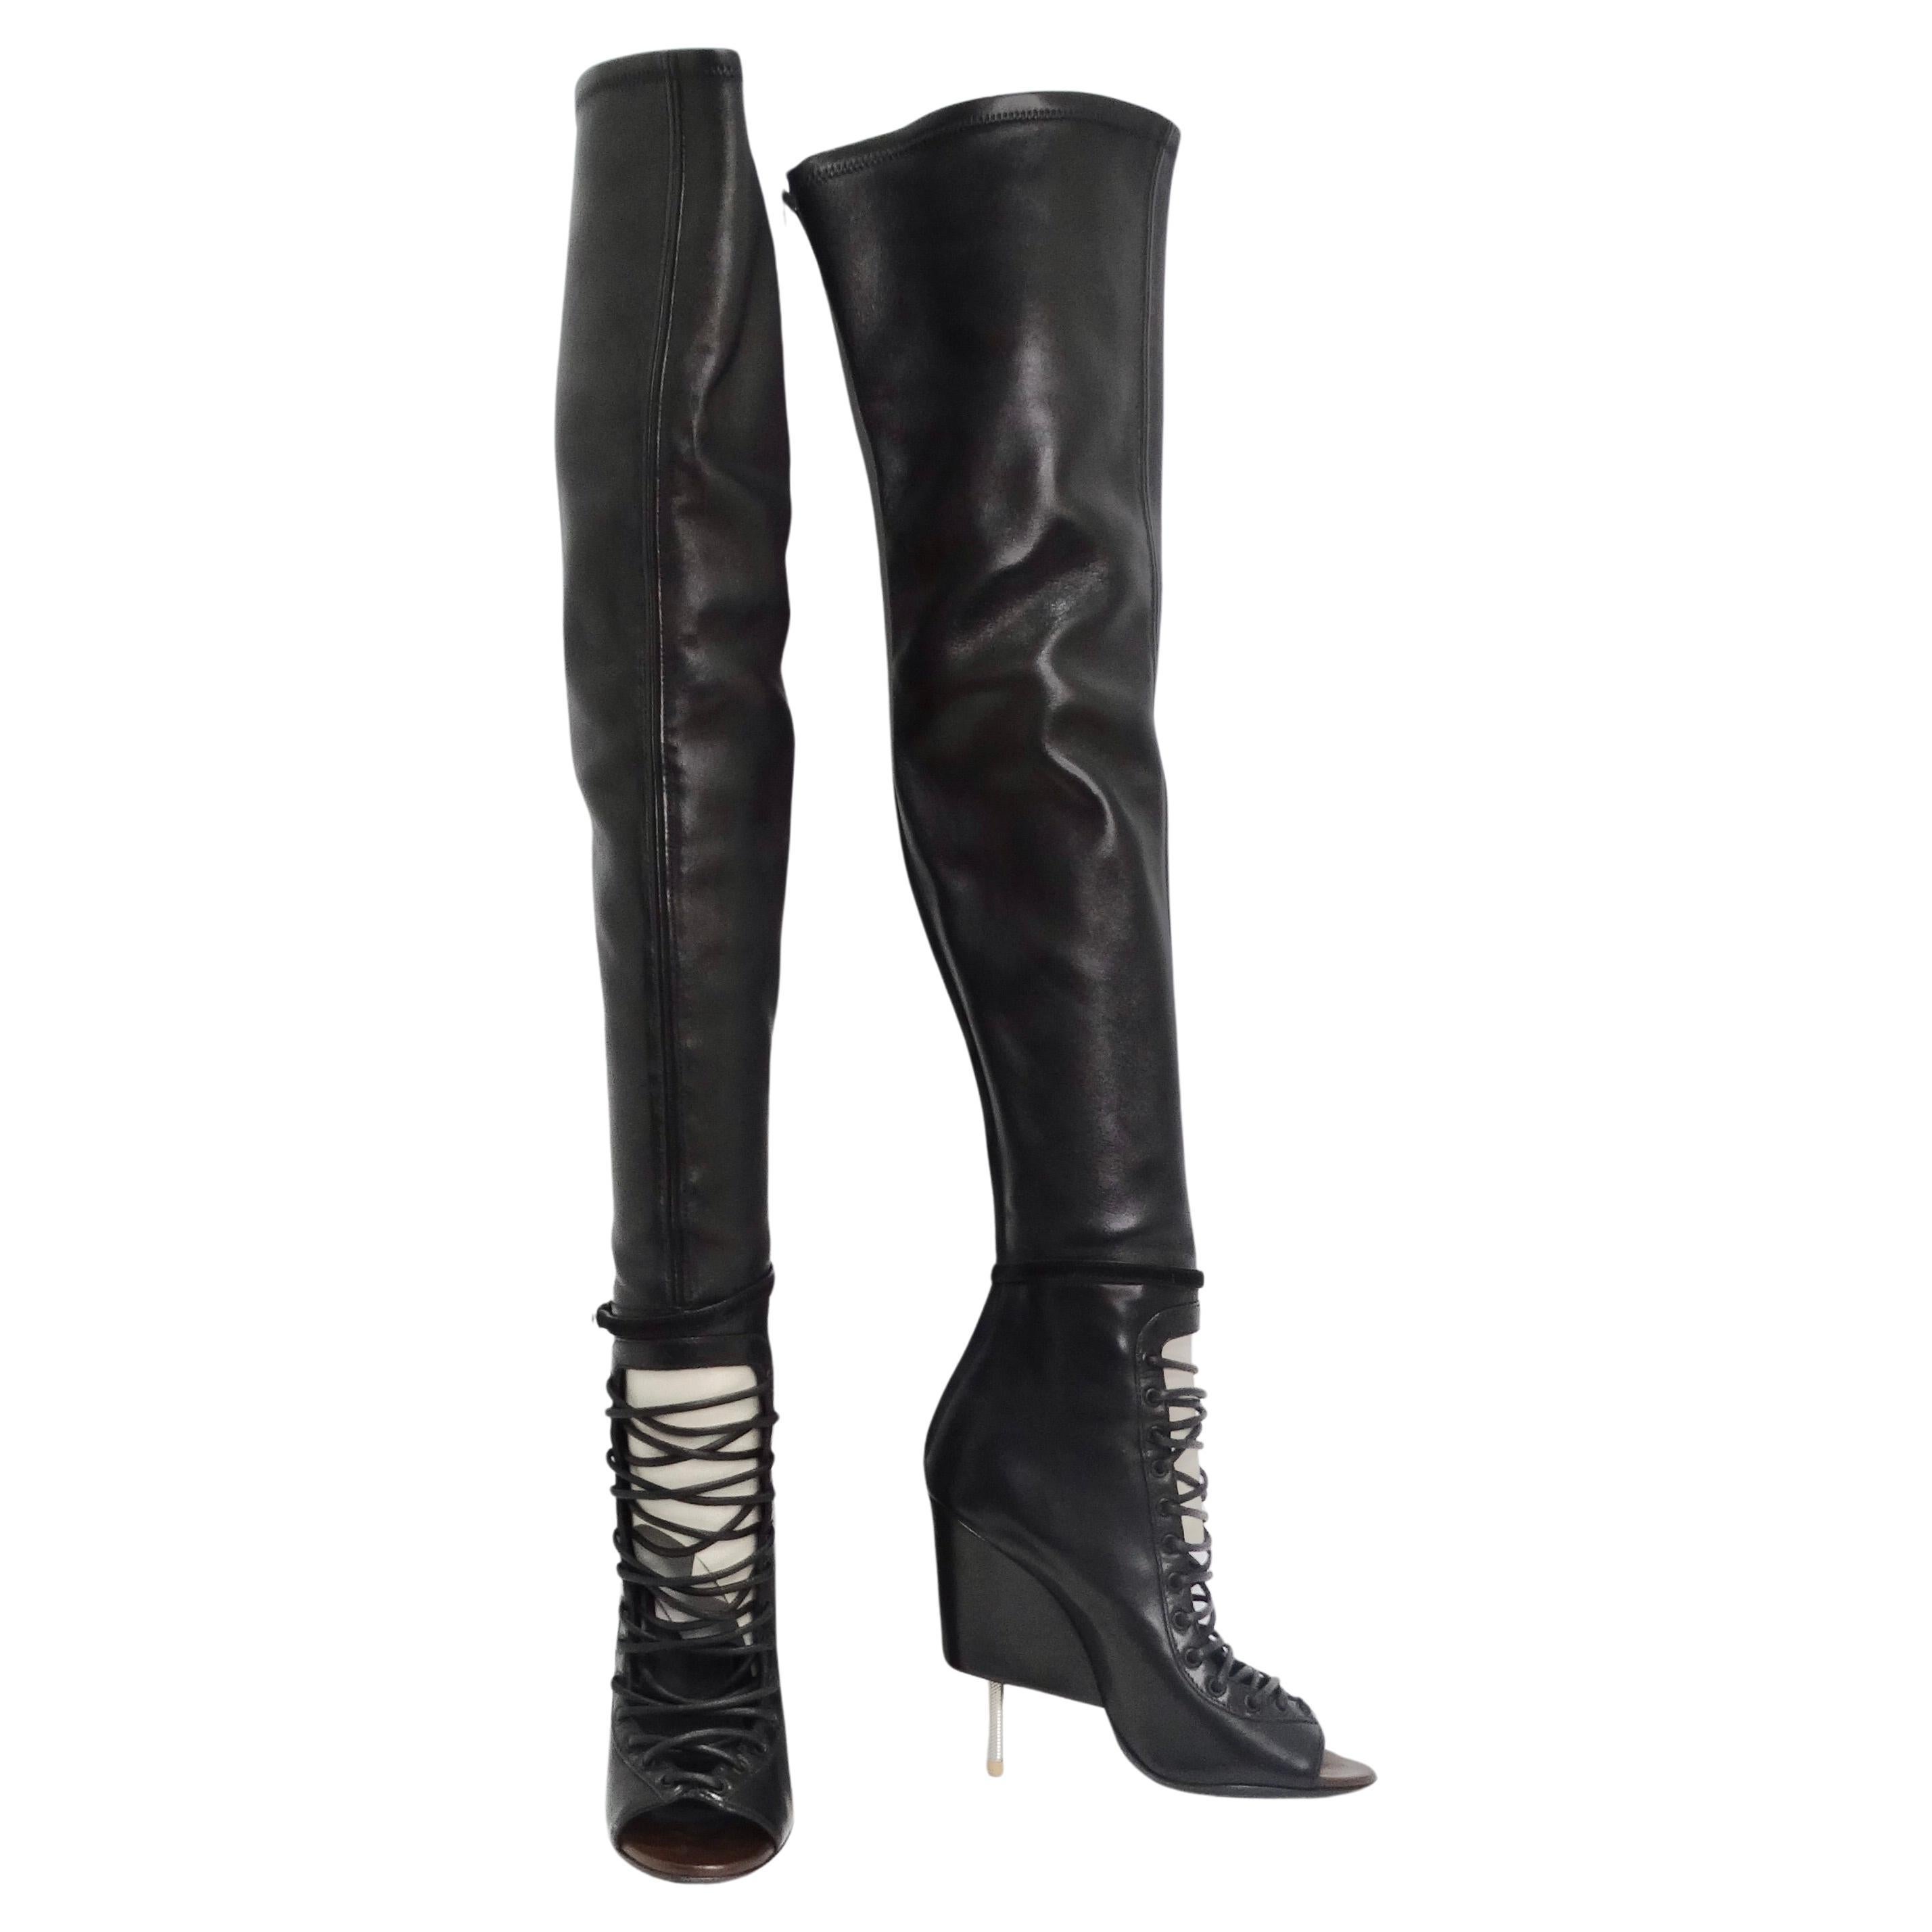 Do not miss out on the Givenchy Nunka Leather Thigh High Boots in Black – a true embodiment of iconic and fearless fashion. These boots redefine the boundaries of statement footwear with their over-the-knee design, featuring an open toe and a